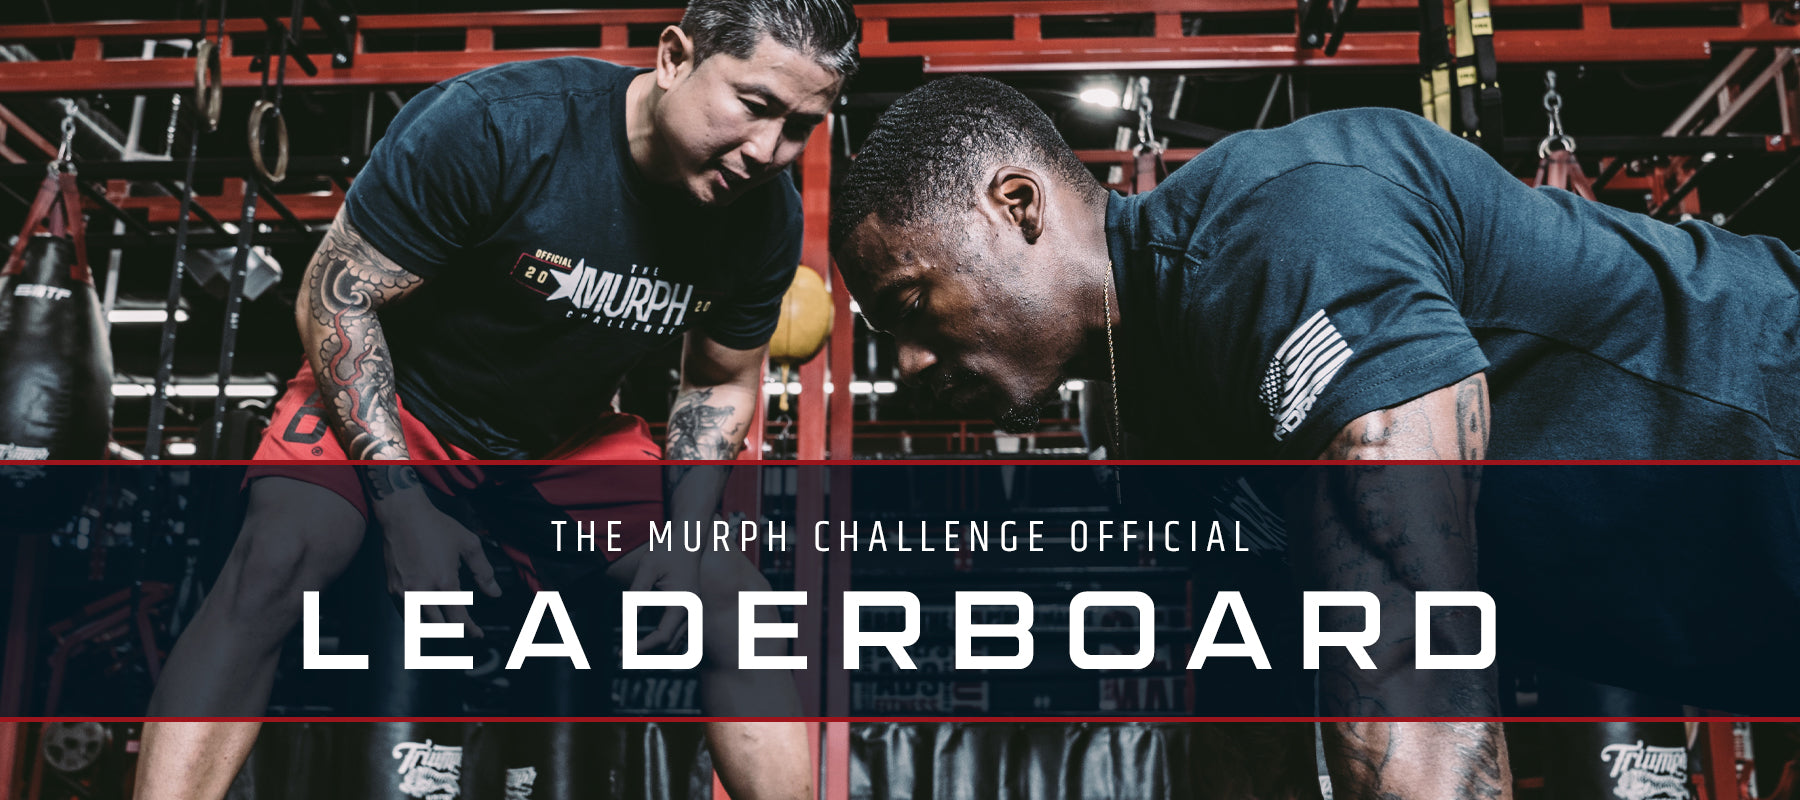 Leaderboard The Murph Challenge 2020 Images, Photos, Reviews